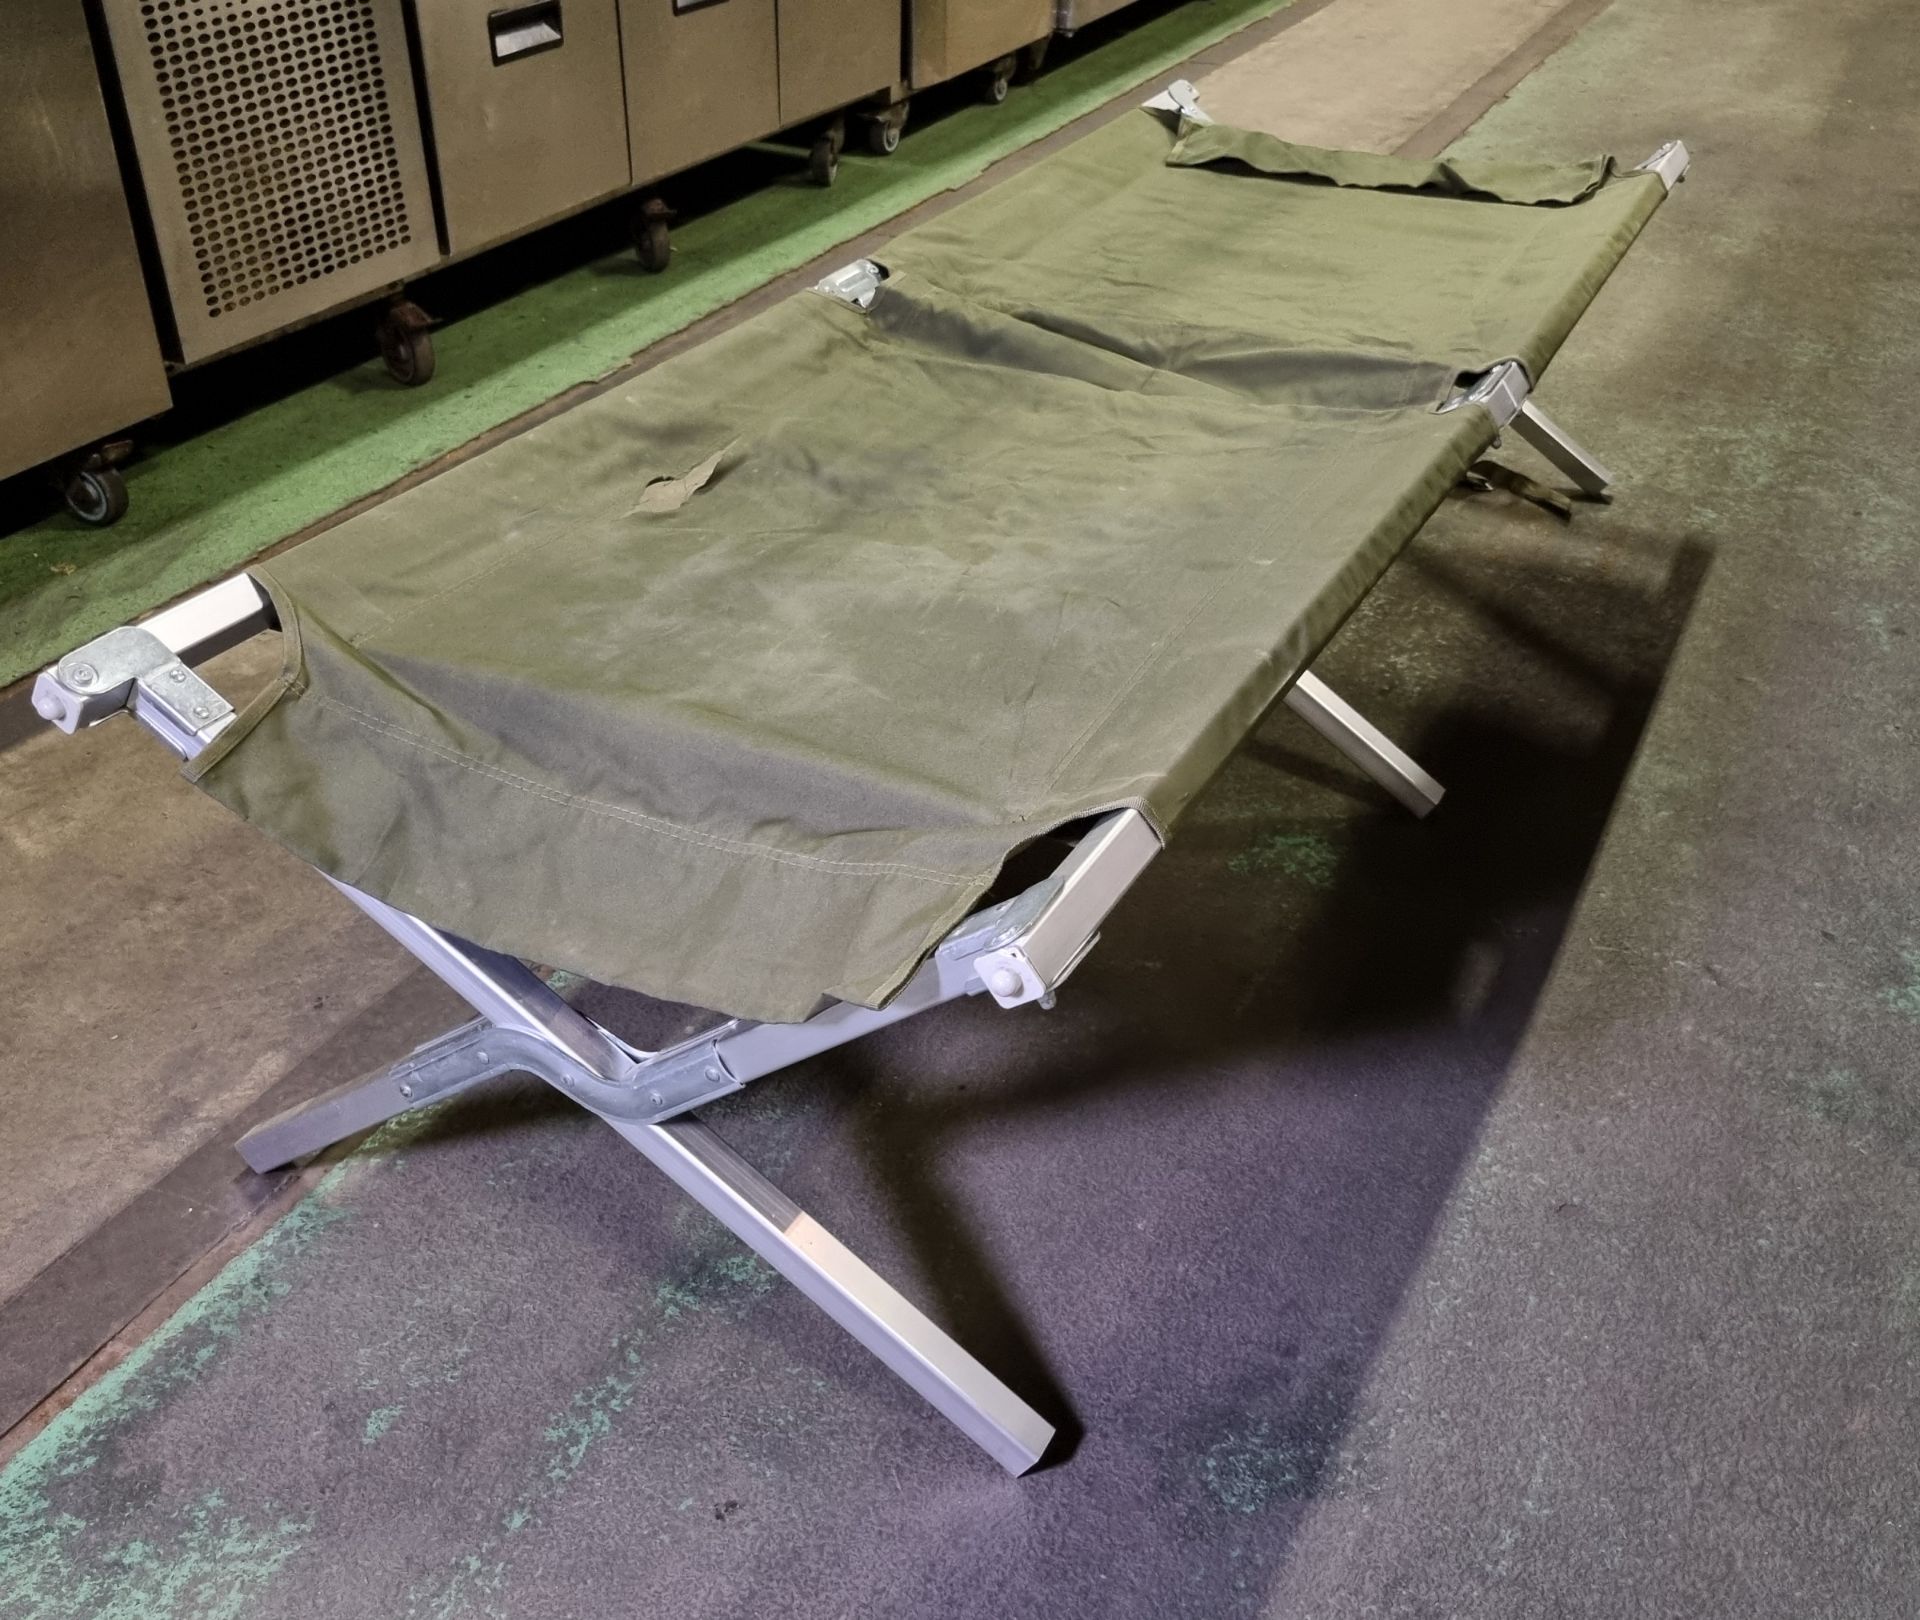 15x Folding field cots - L 1900 x W 700 x H 450mm - SPARES OR REPAIRS - Image 3 of 5